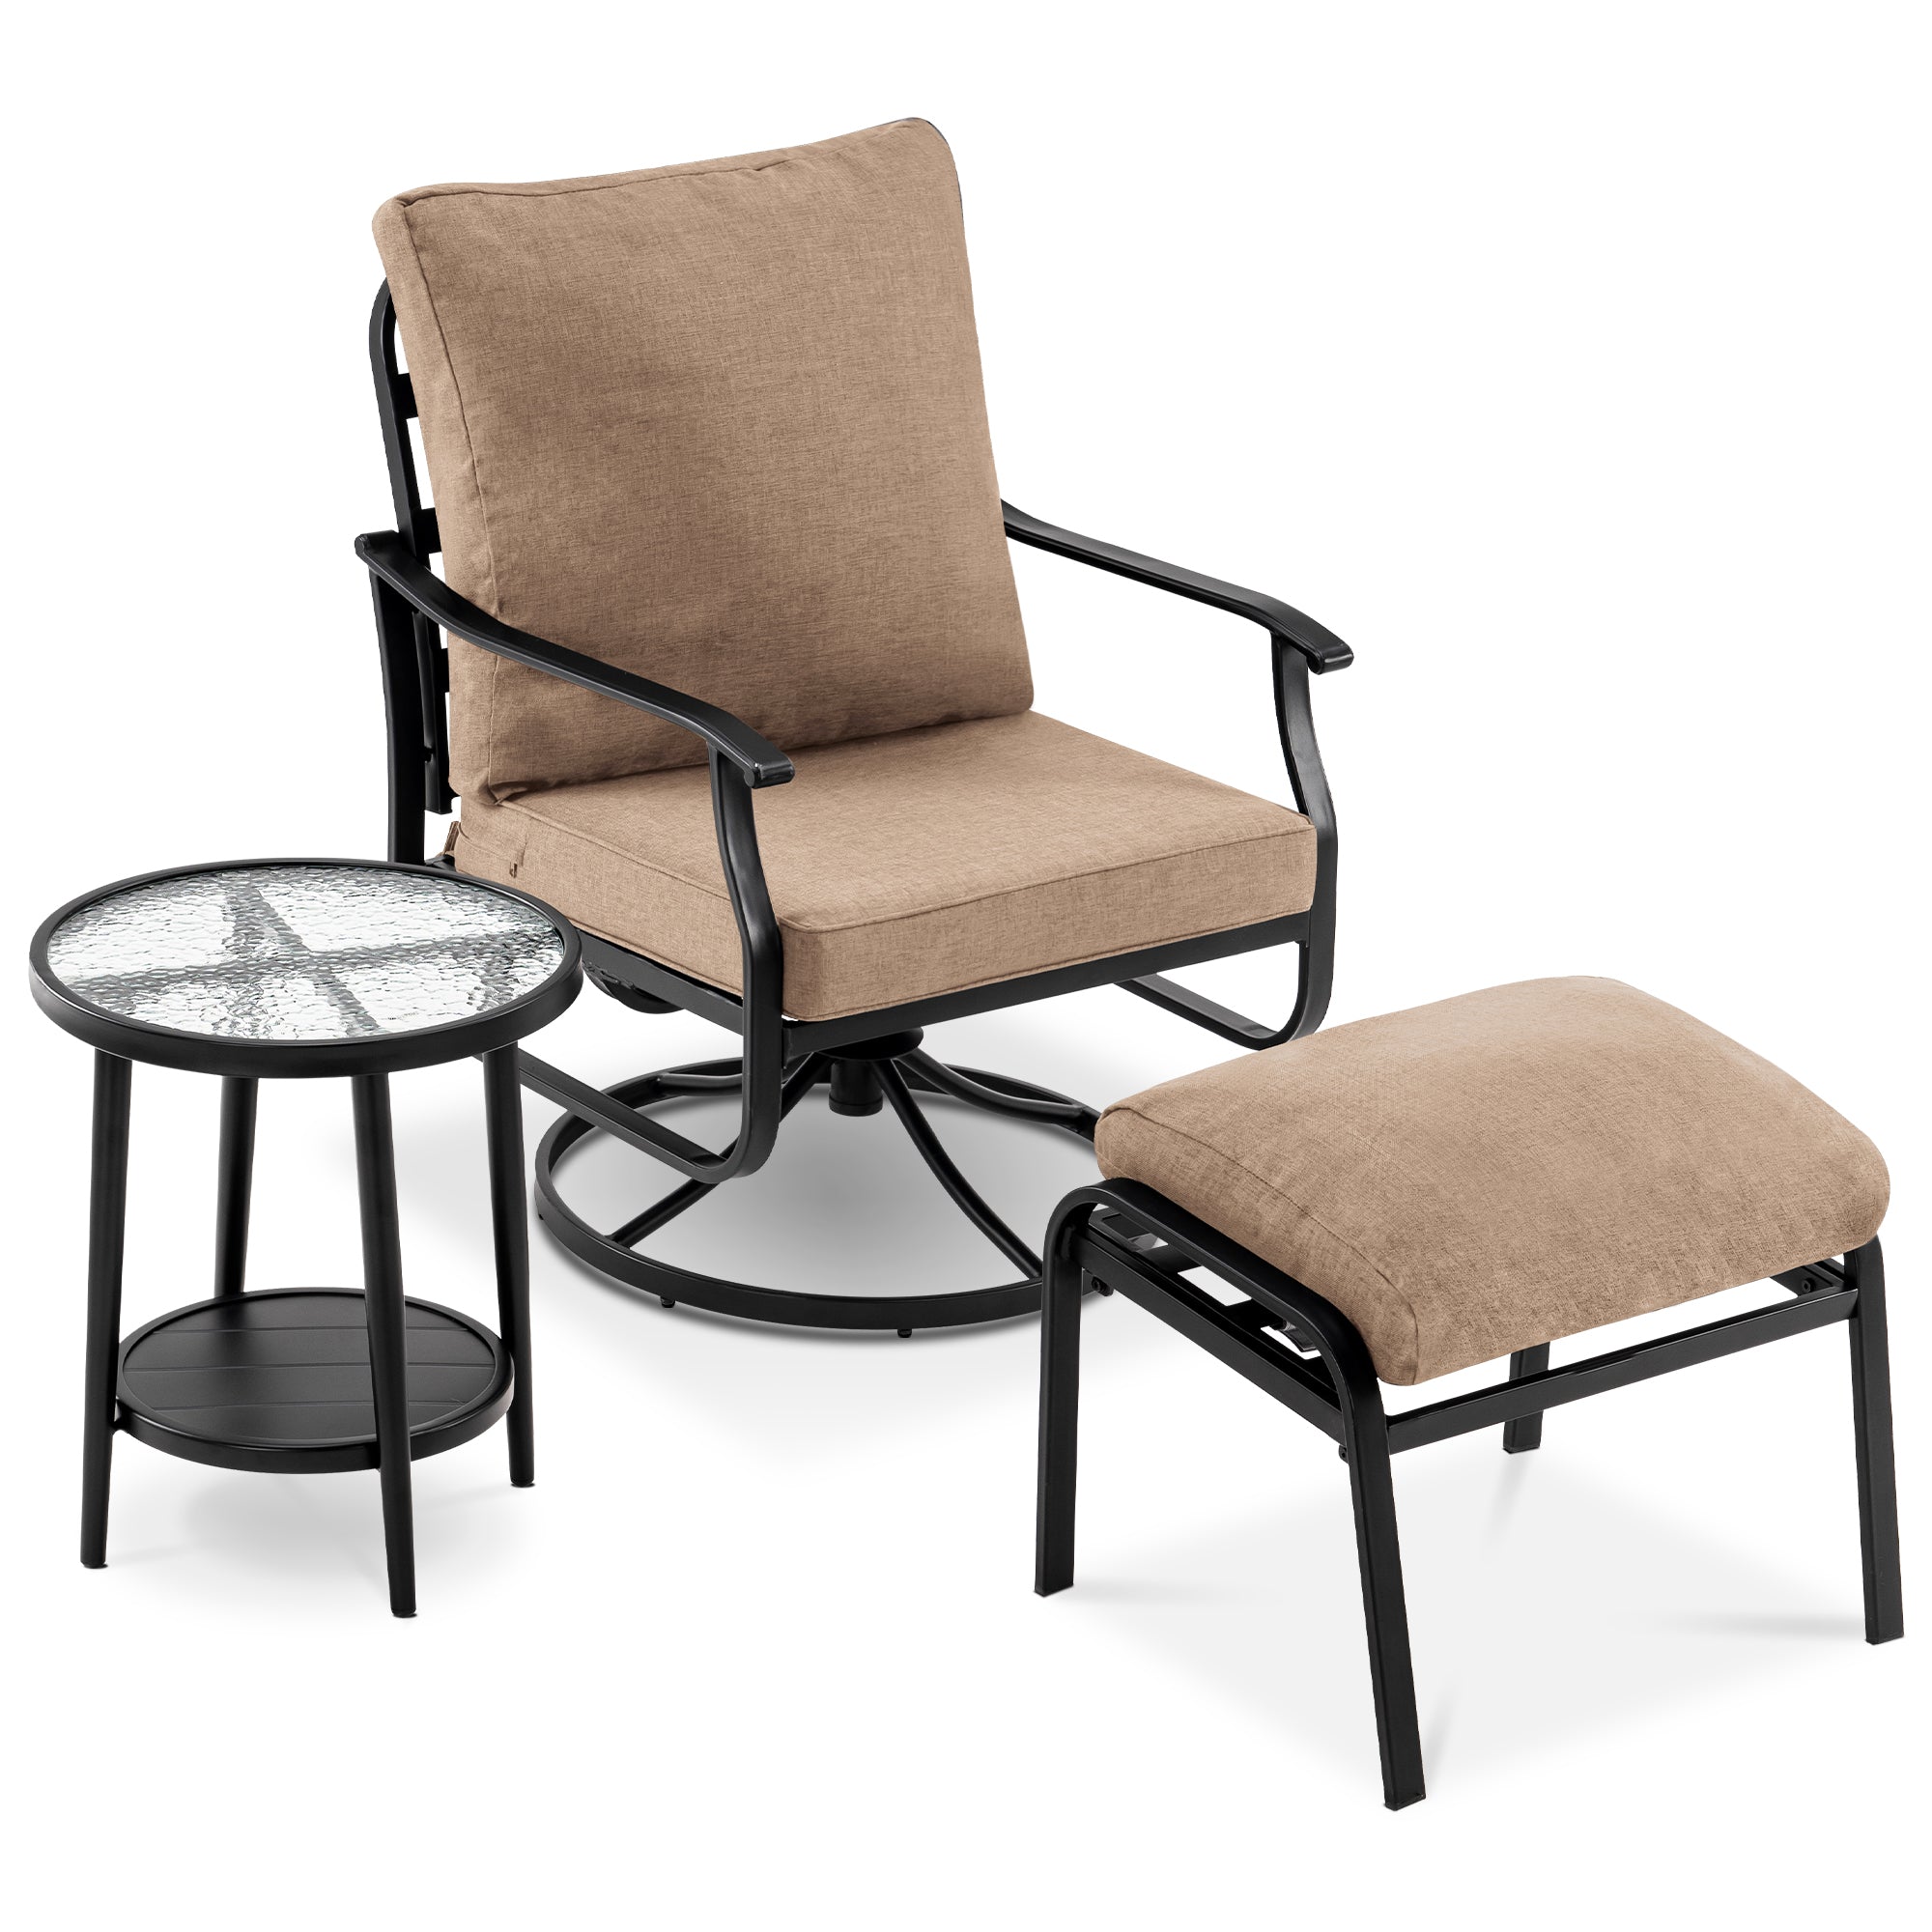 ivinta Furniture Patio Chairs Set of 3, Outdoor Metal Swivel Chairs with Side Table Thick Removable Cushions, Bistro Chair with Ottoman for Backyard, Garden, Balcony, Porch